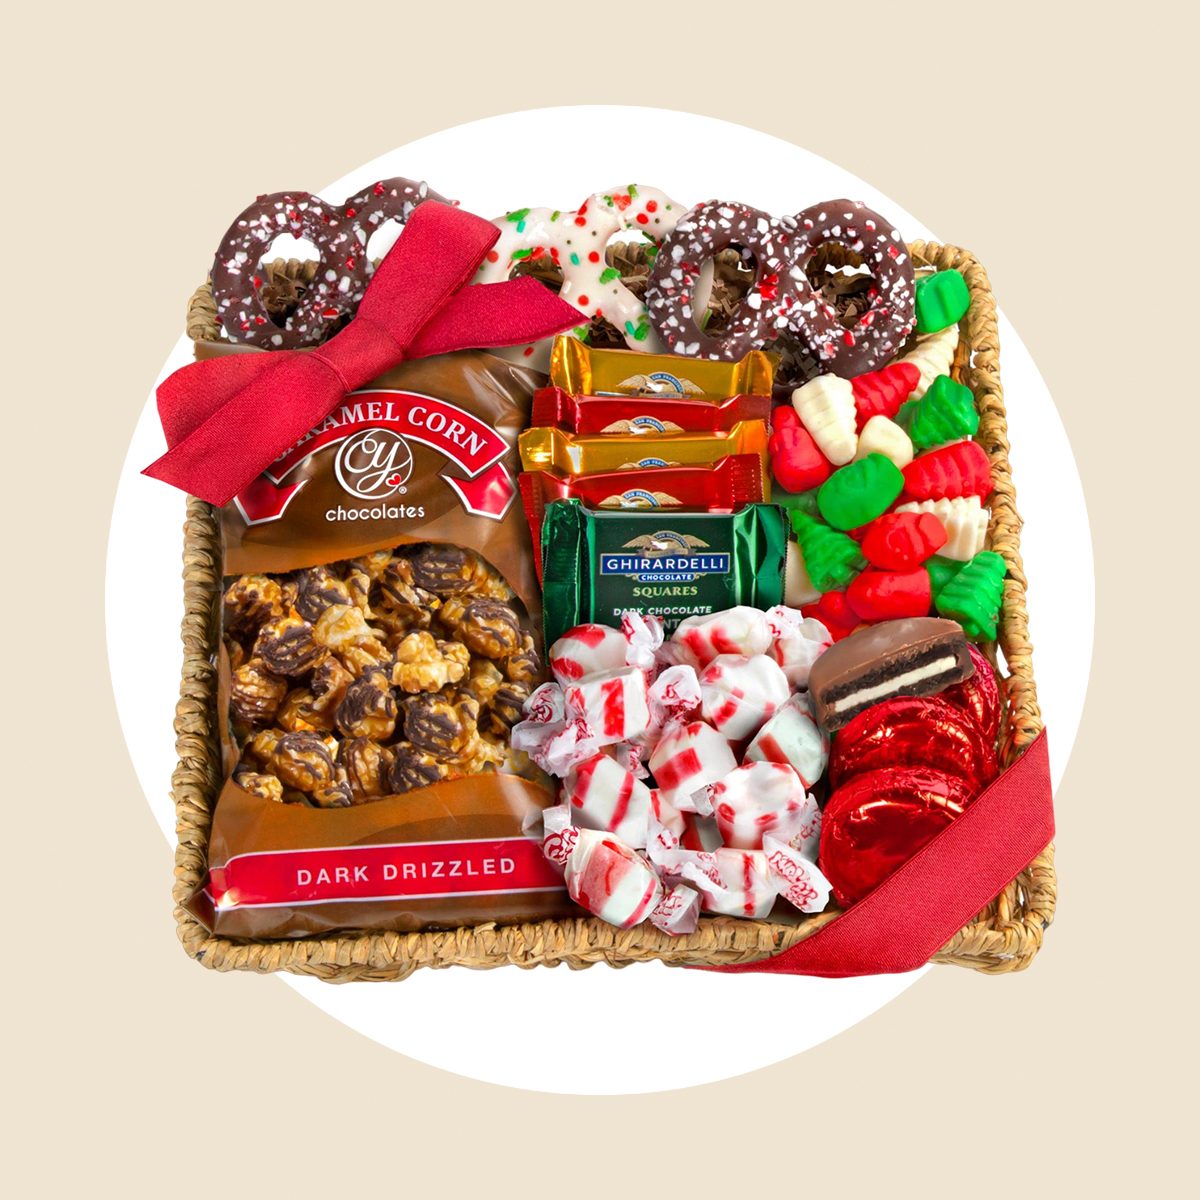 Gourmet Gift Baskets You'll Love To Give This Holiday